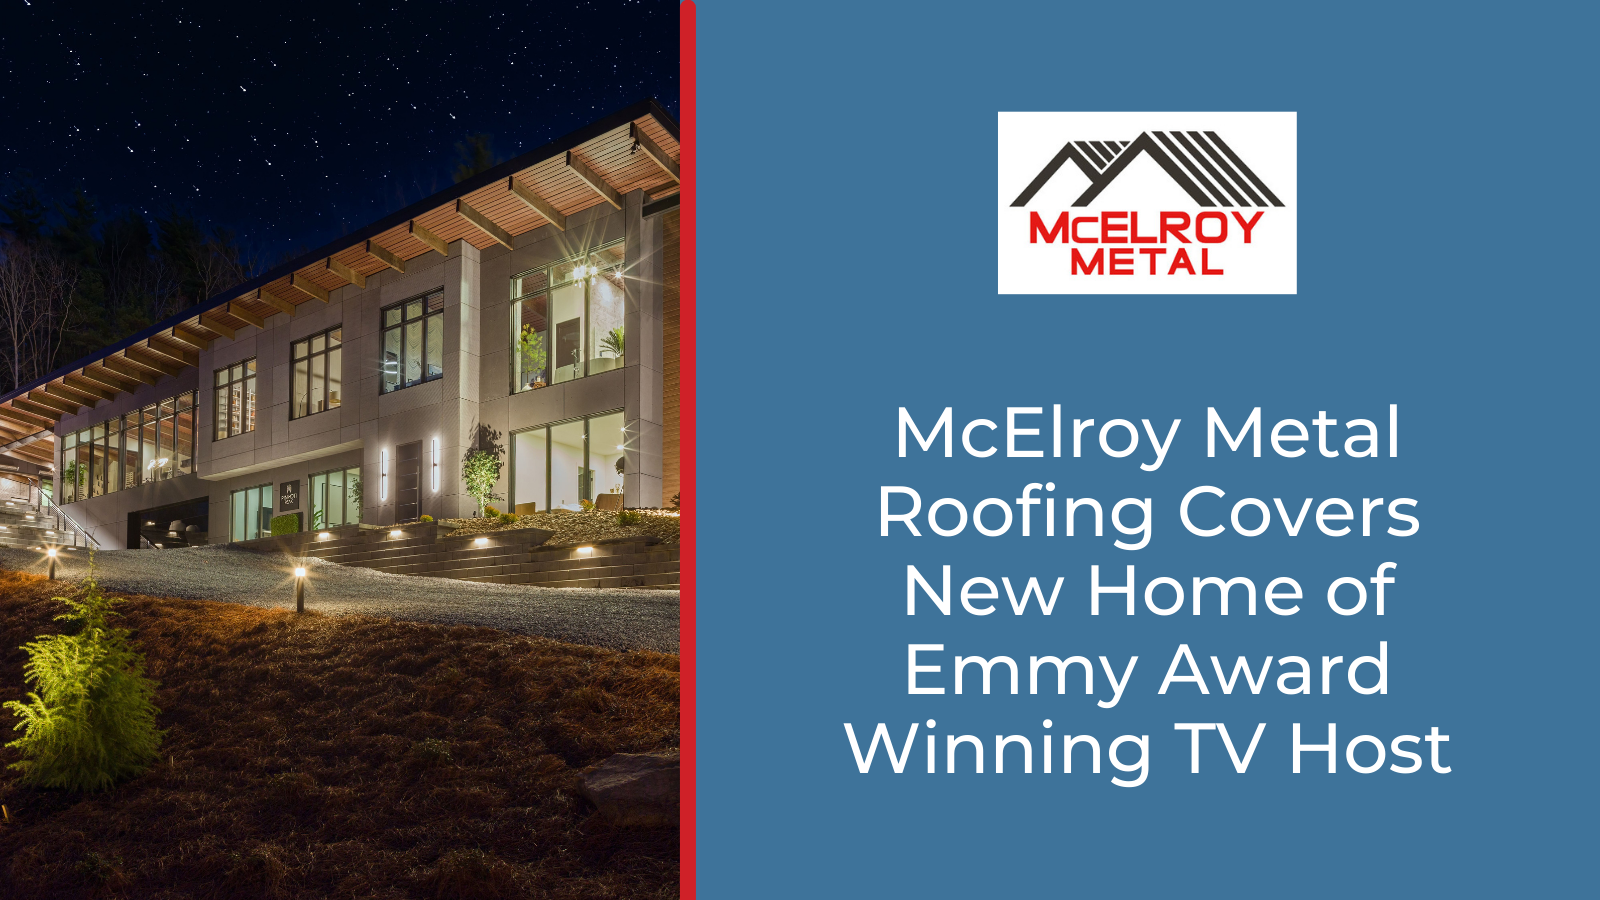 McElroy Metal Roofing Covers New Home of Emmy Award Winning TV Host